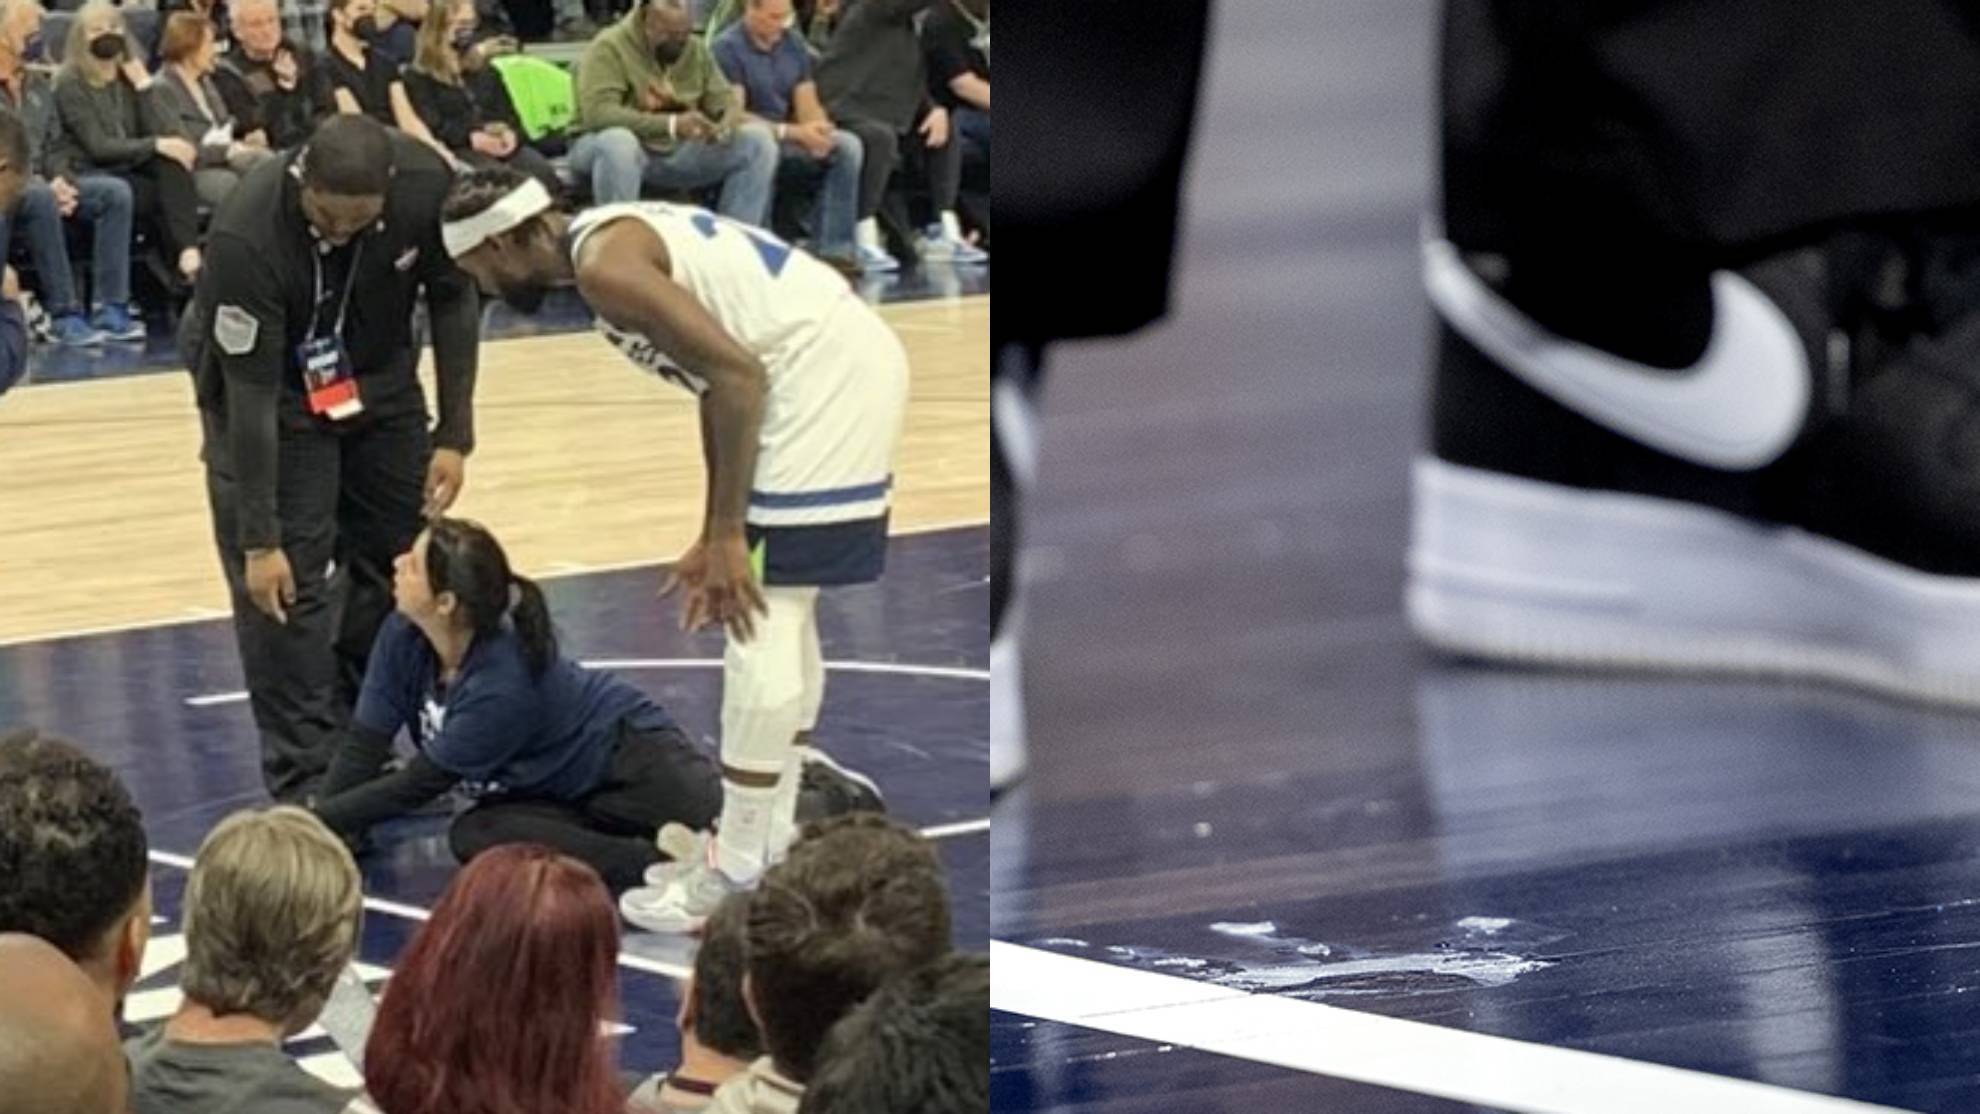 Surreal scene in the NBA: Fan tries to glue herself to the floor in protest.